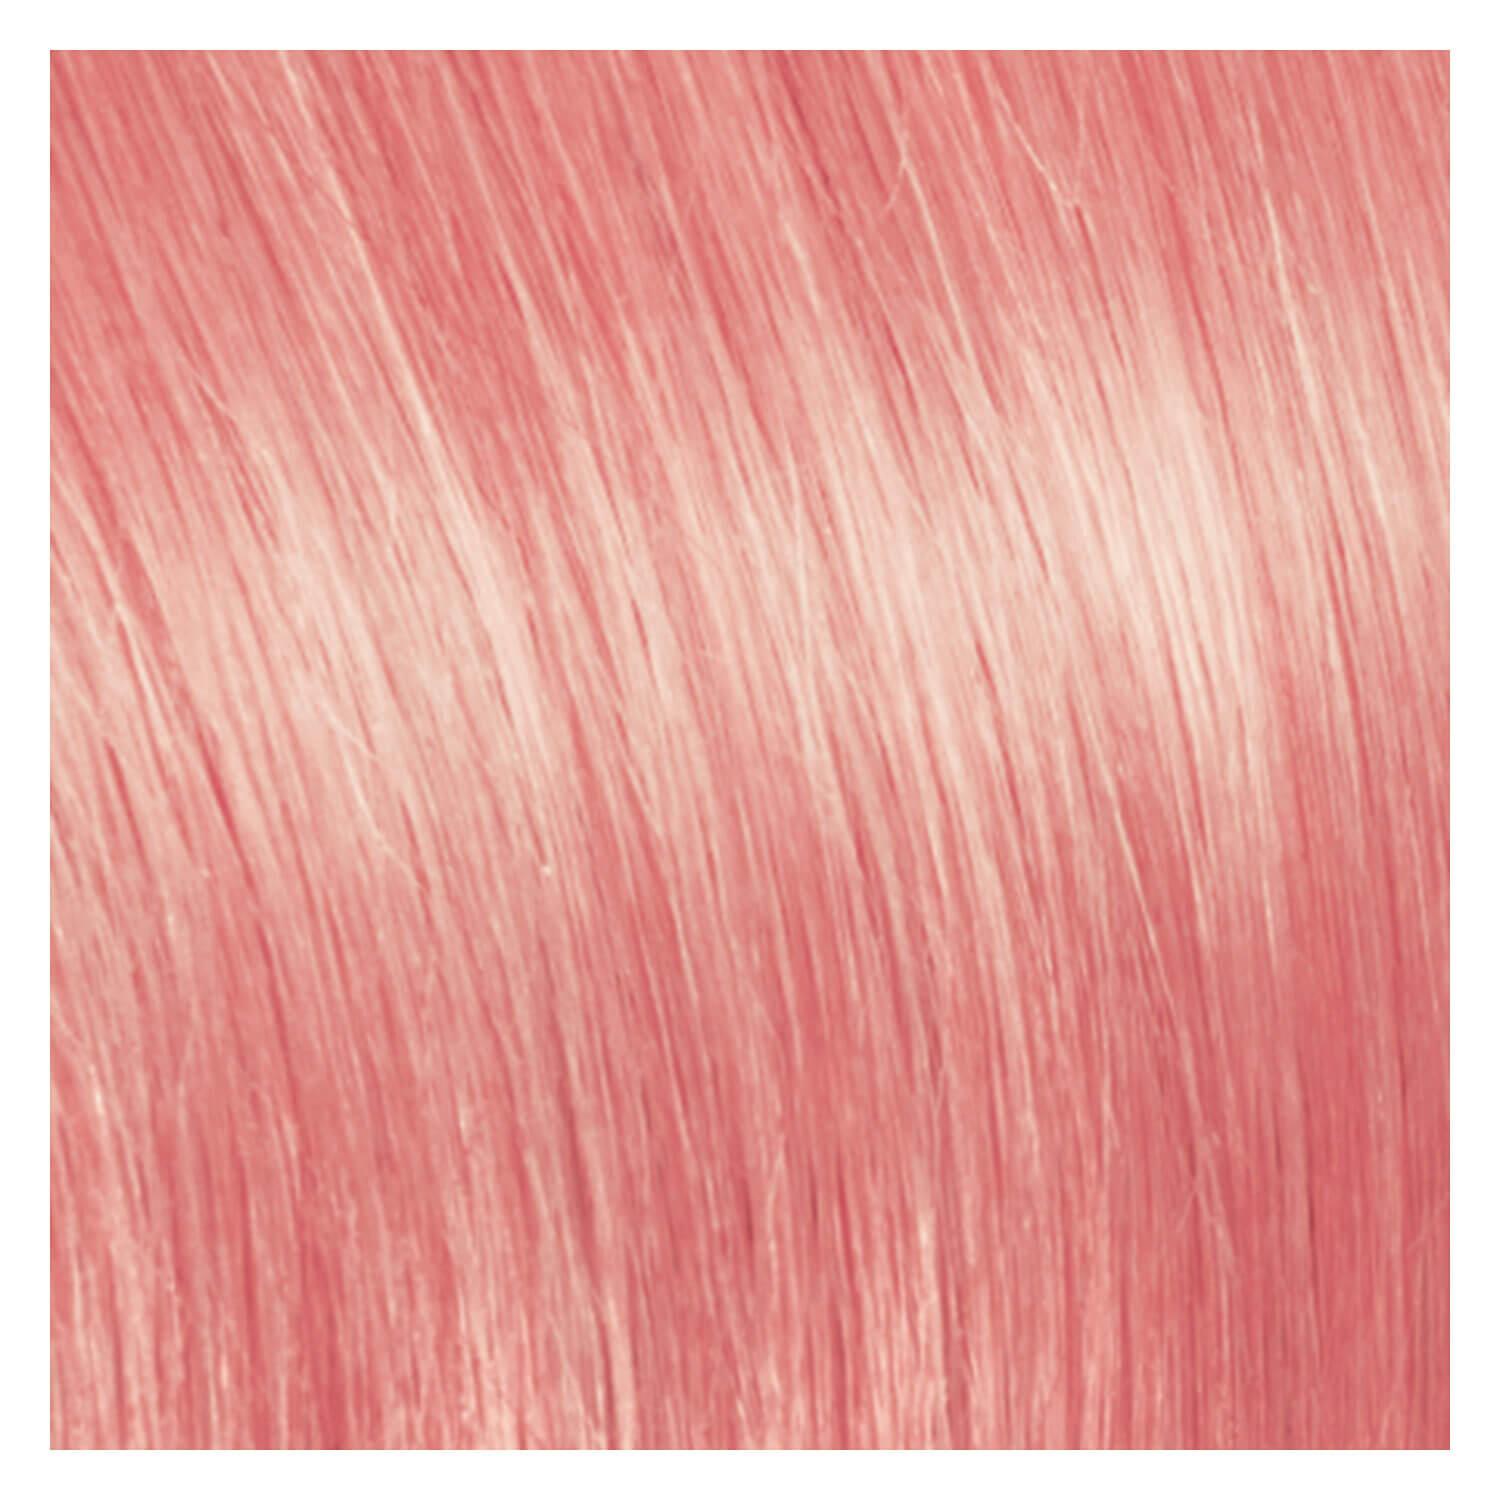 SHE Clip In-System Hair Extensions - Pink 40cm